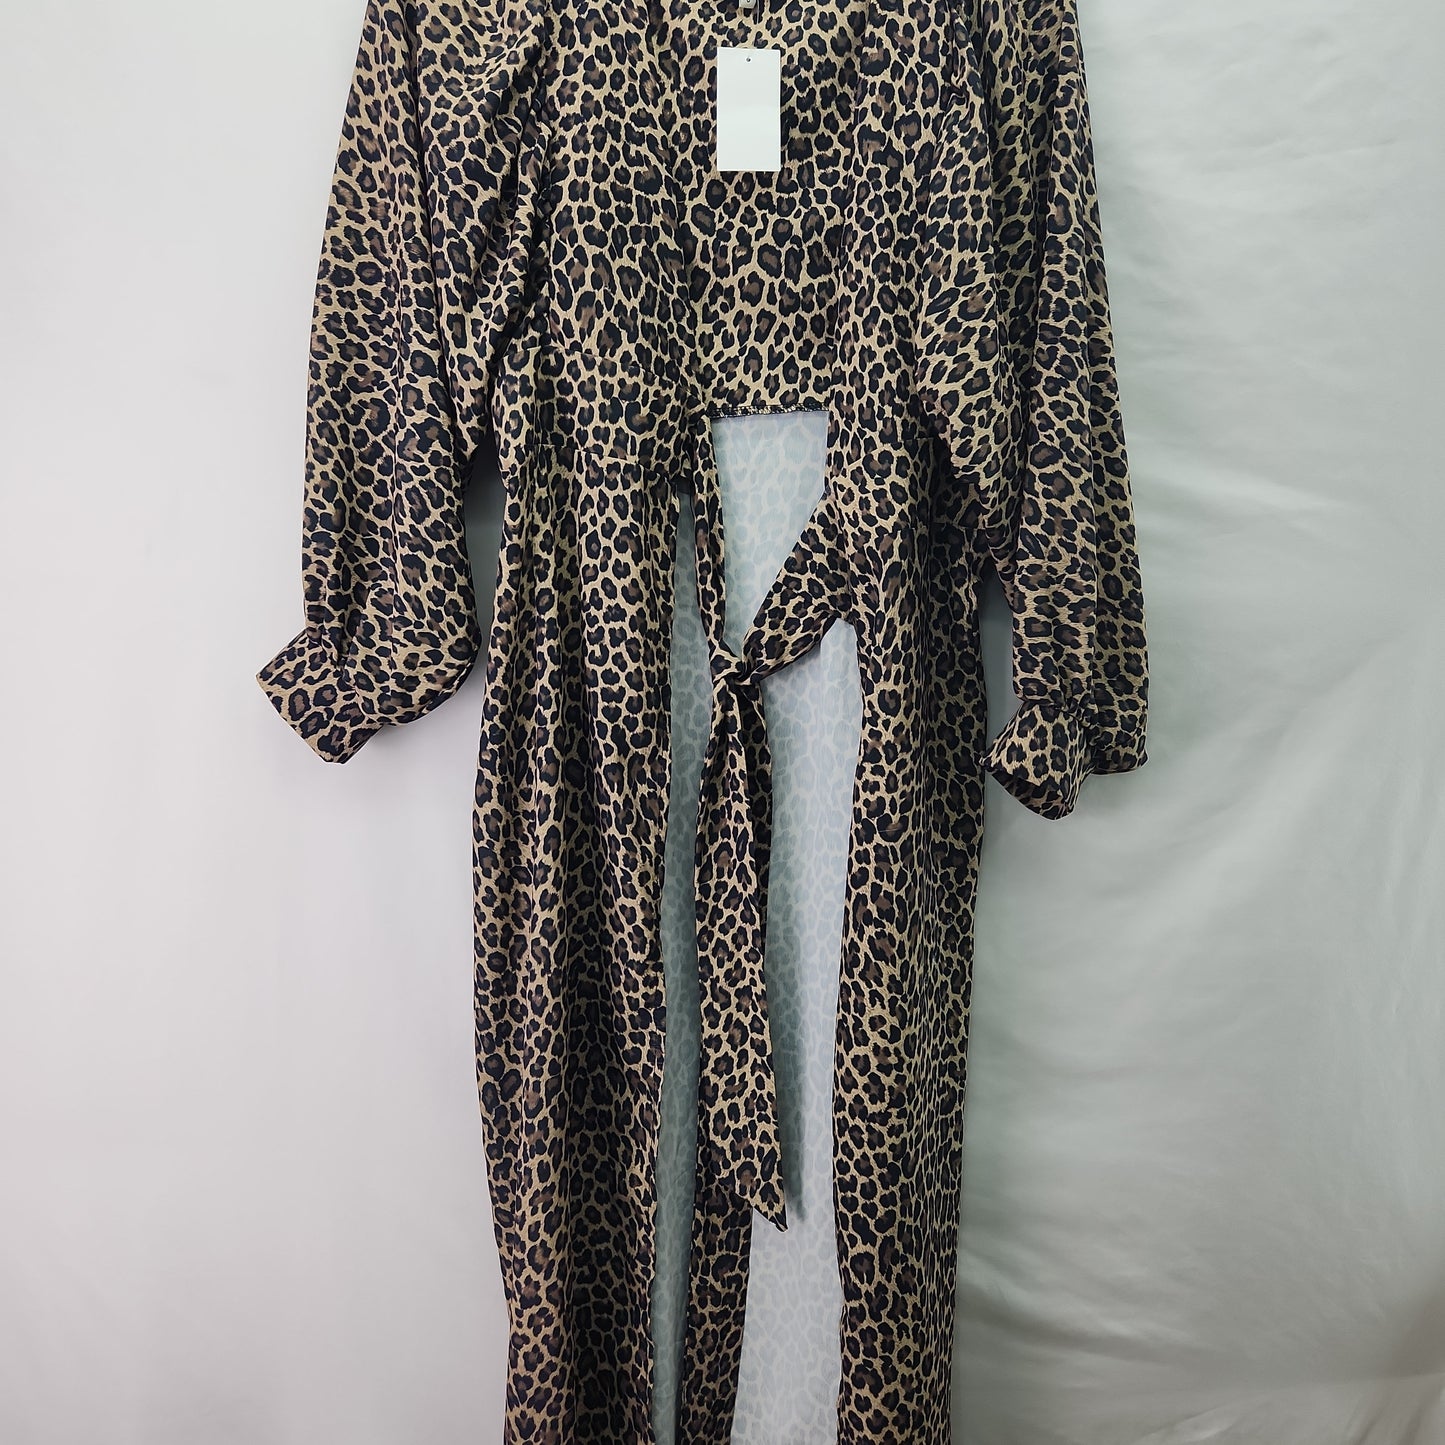 Never Fully Dressed Beach Cover Up Dress Leopard Print - 6